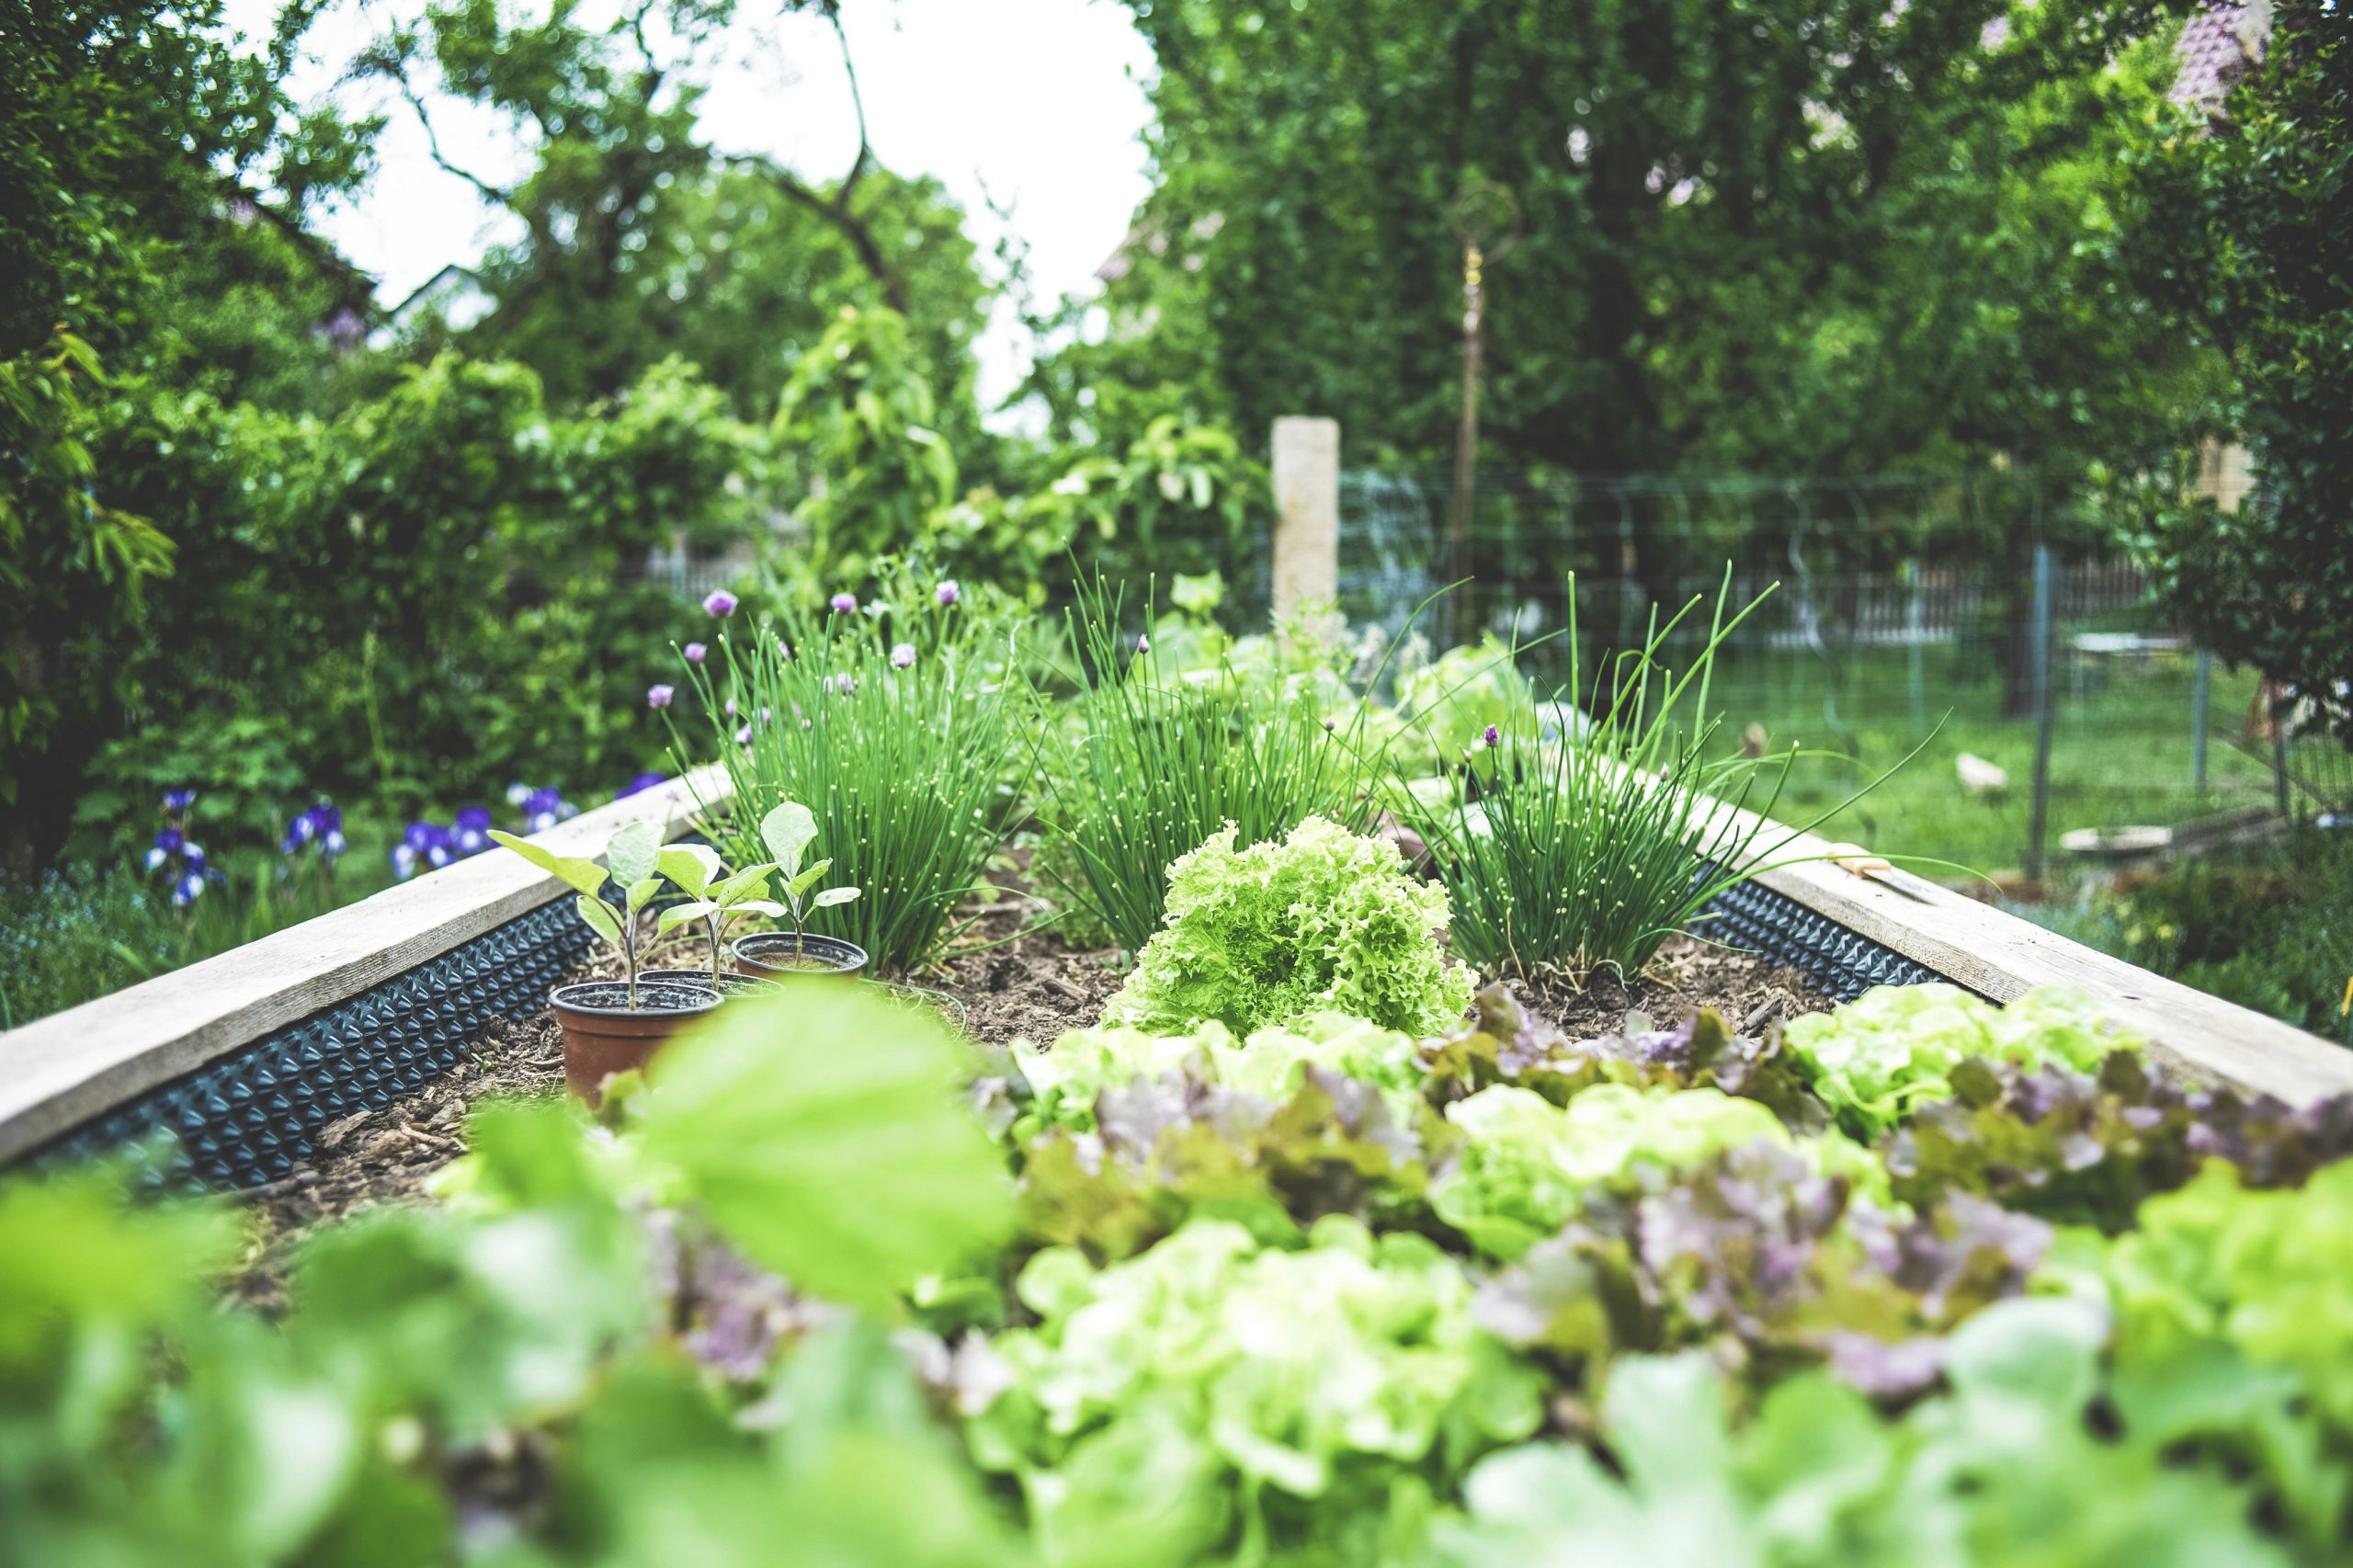 Growing Your Own Organic Food at Home